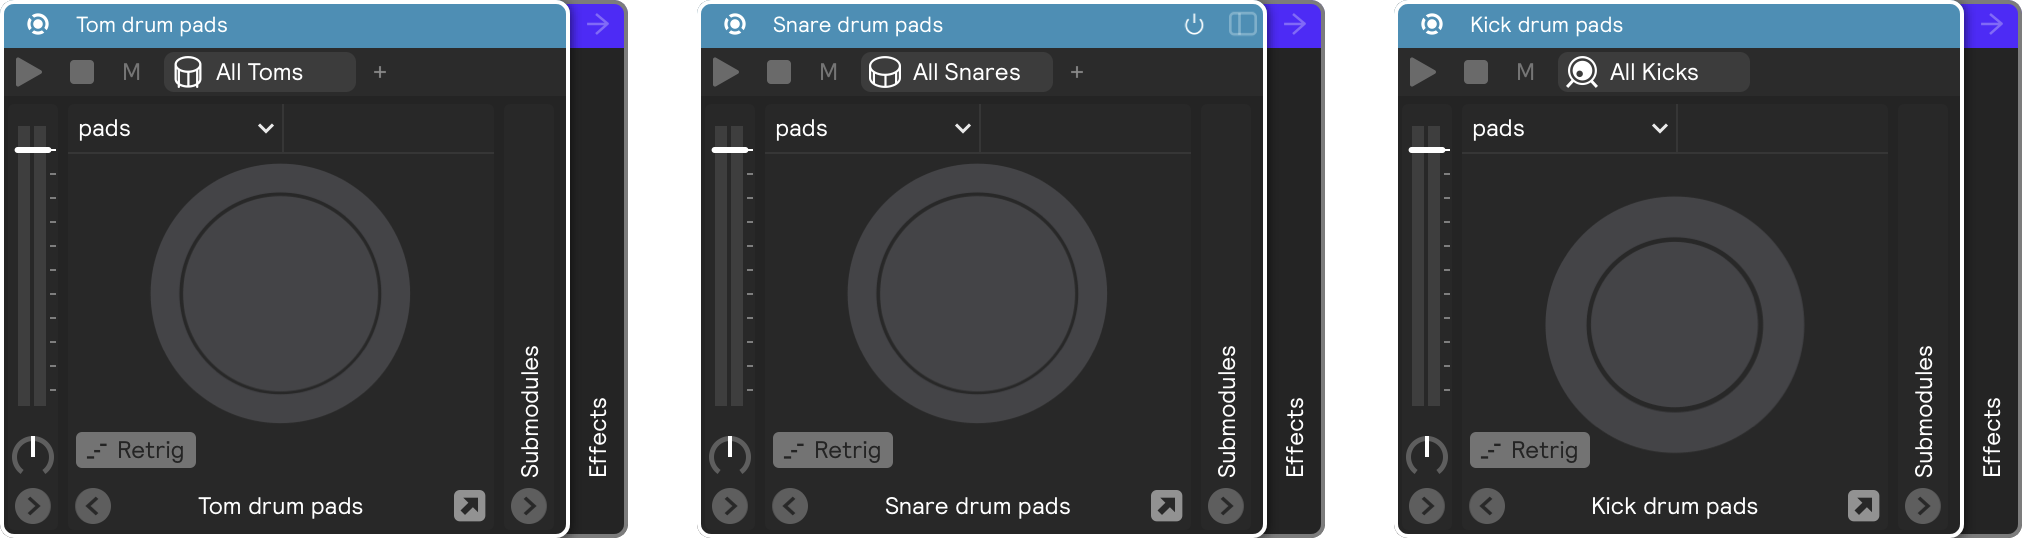 An image showing four examples of drum pads with different amounts of training